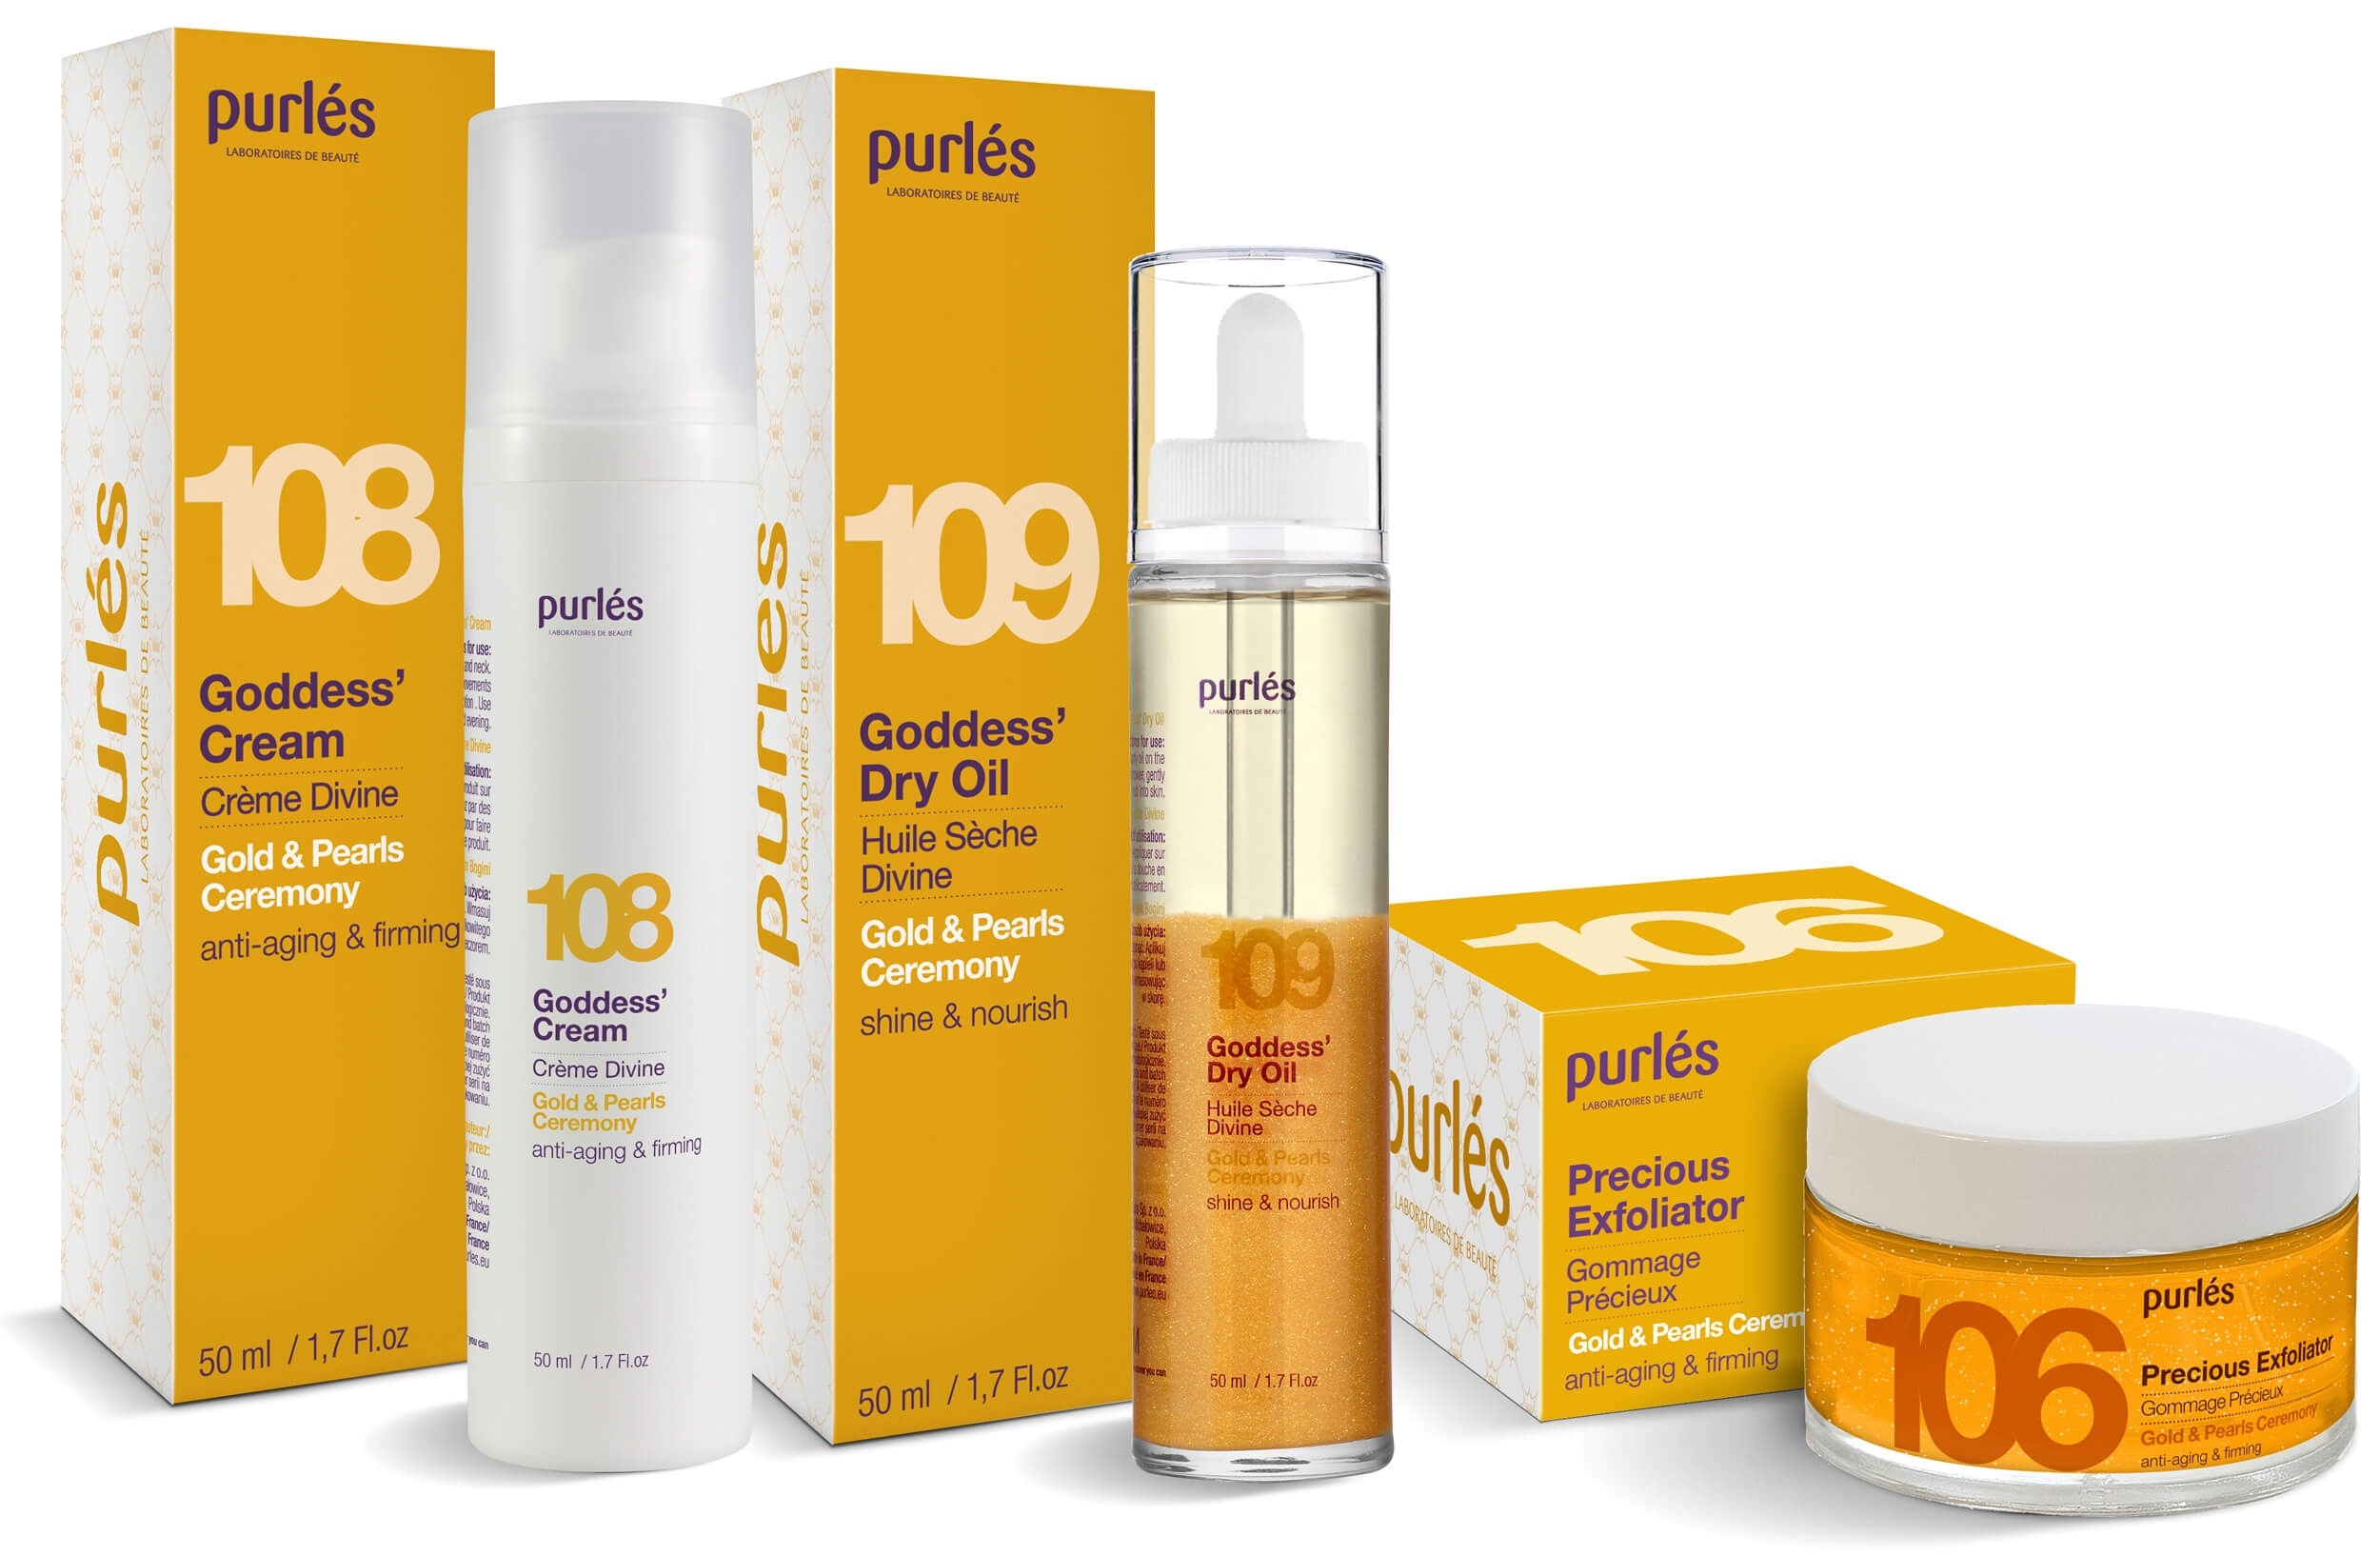 Purles 106 Gold & Pearls Ceremony Anti-ageing Set 